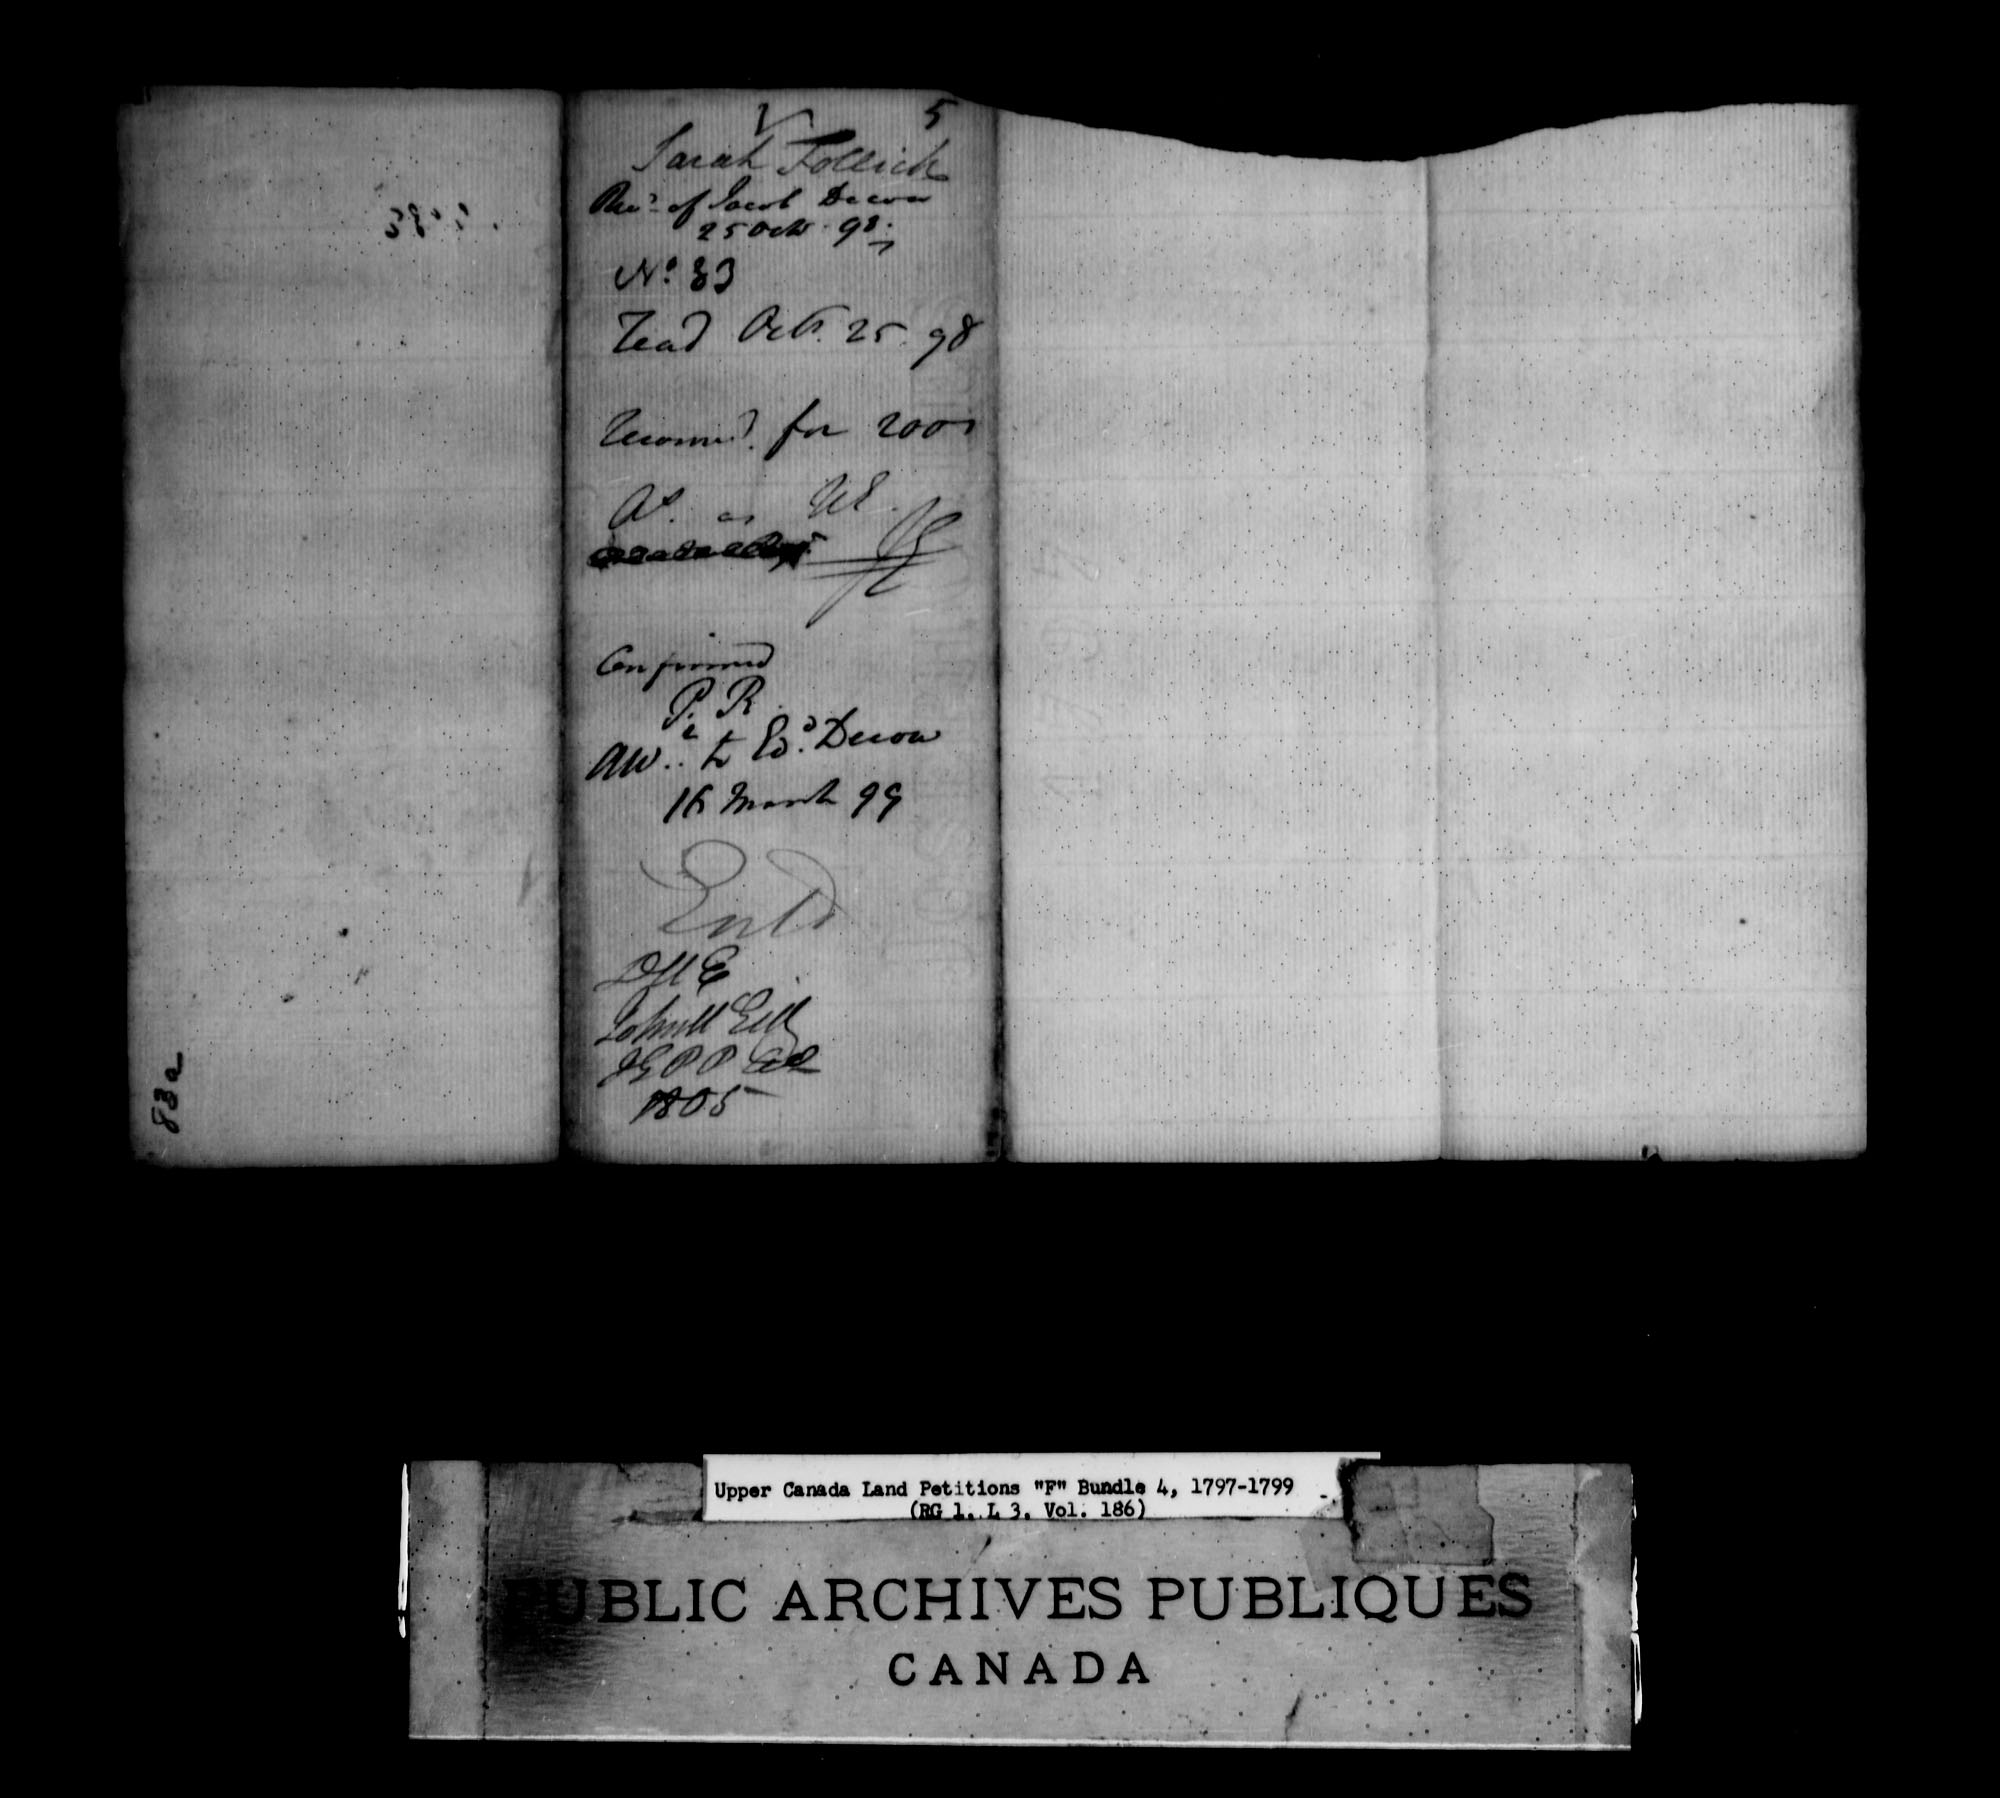 Title: Upper Canada Land Petitions (1763-1865) - Mikan Number: 205131 - Microform: c-1894